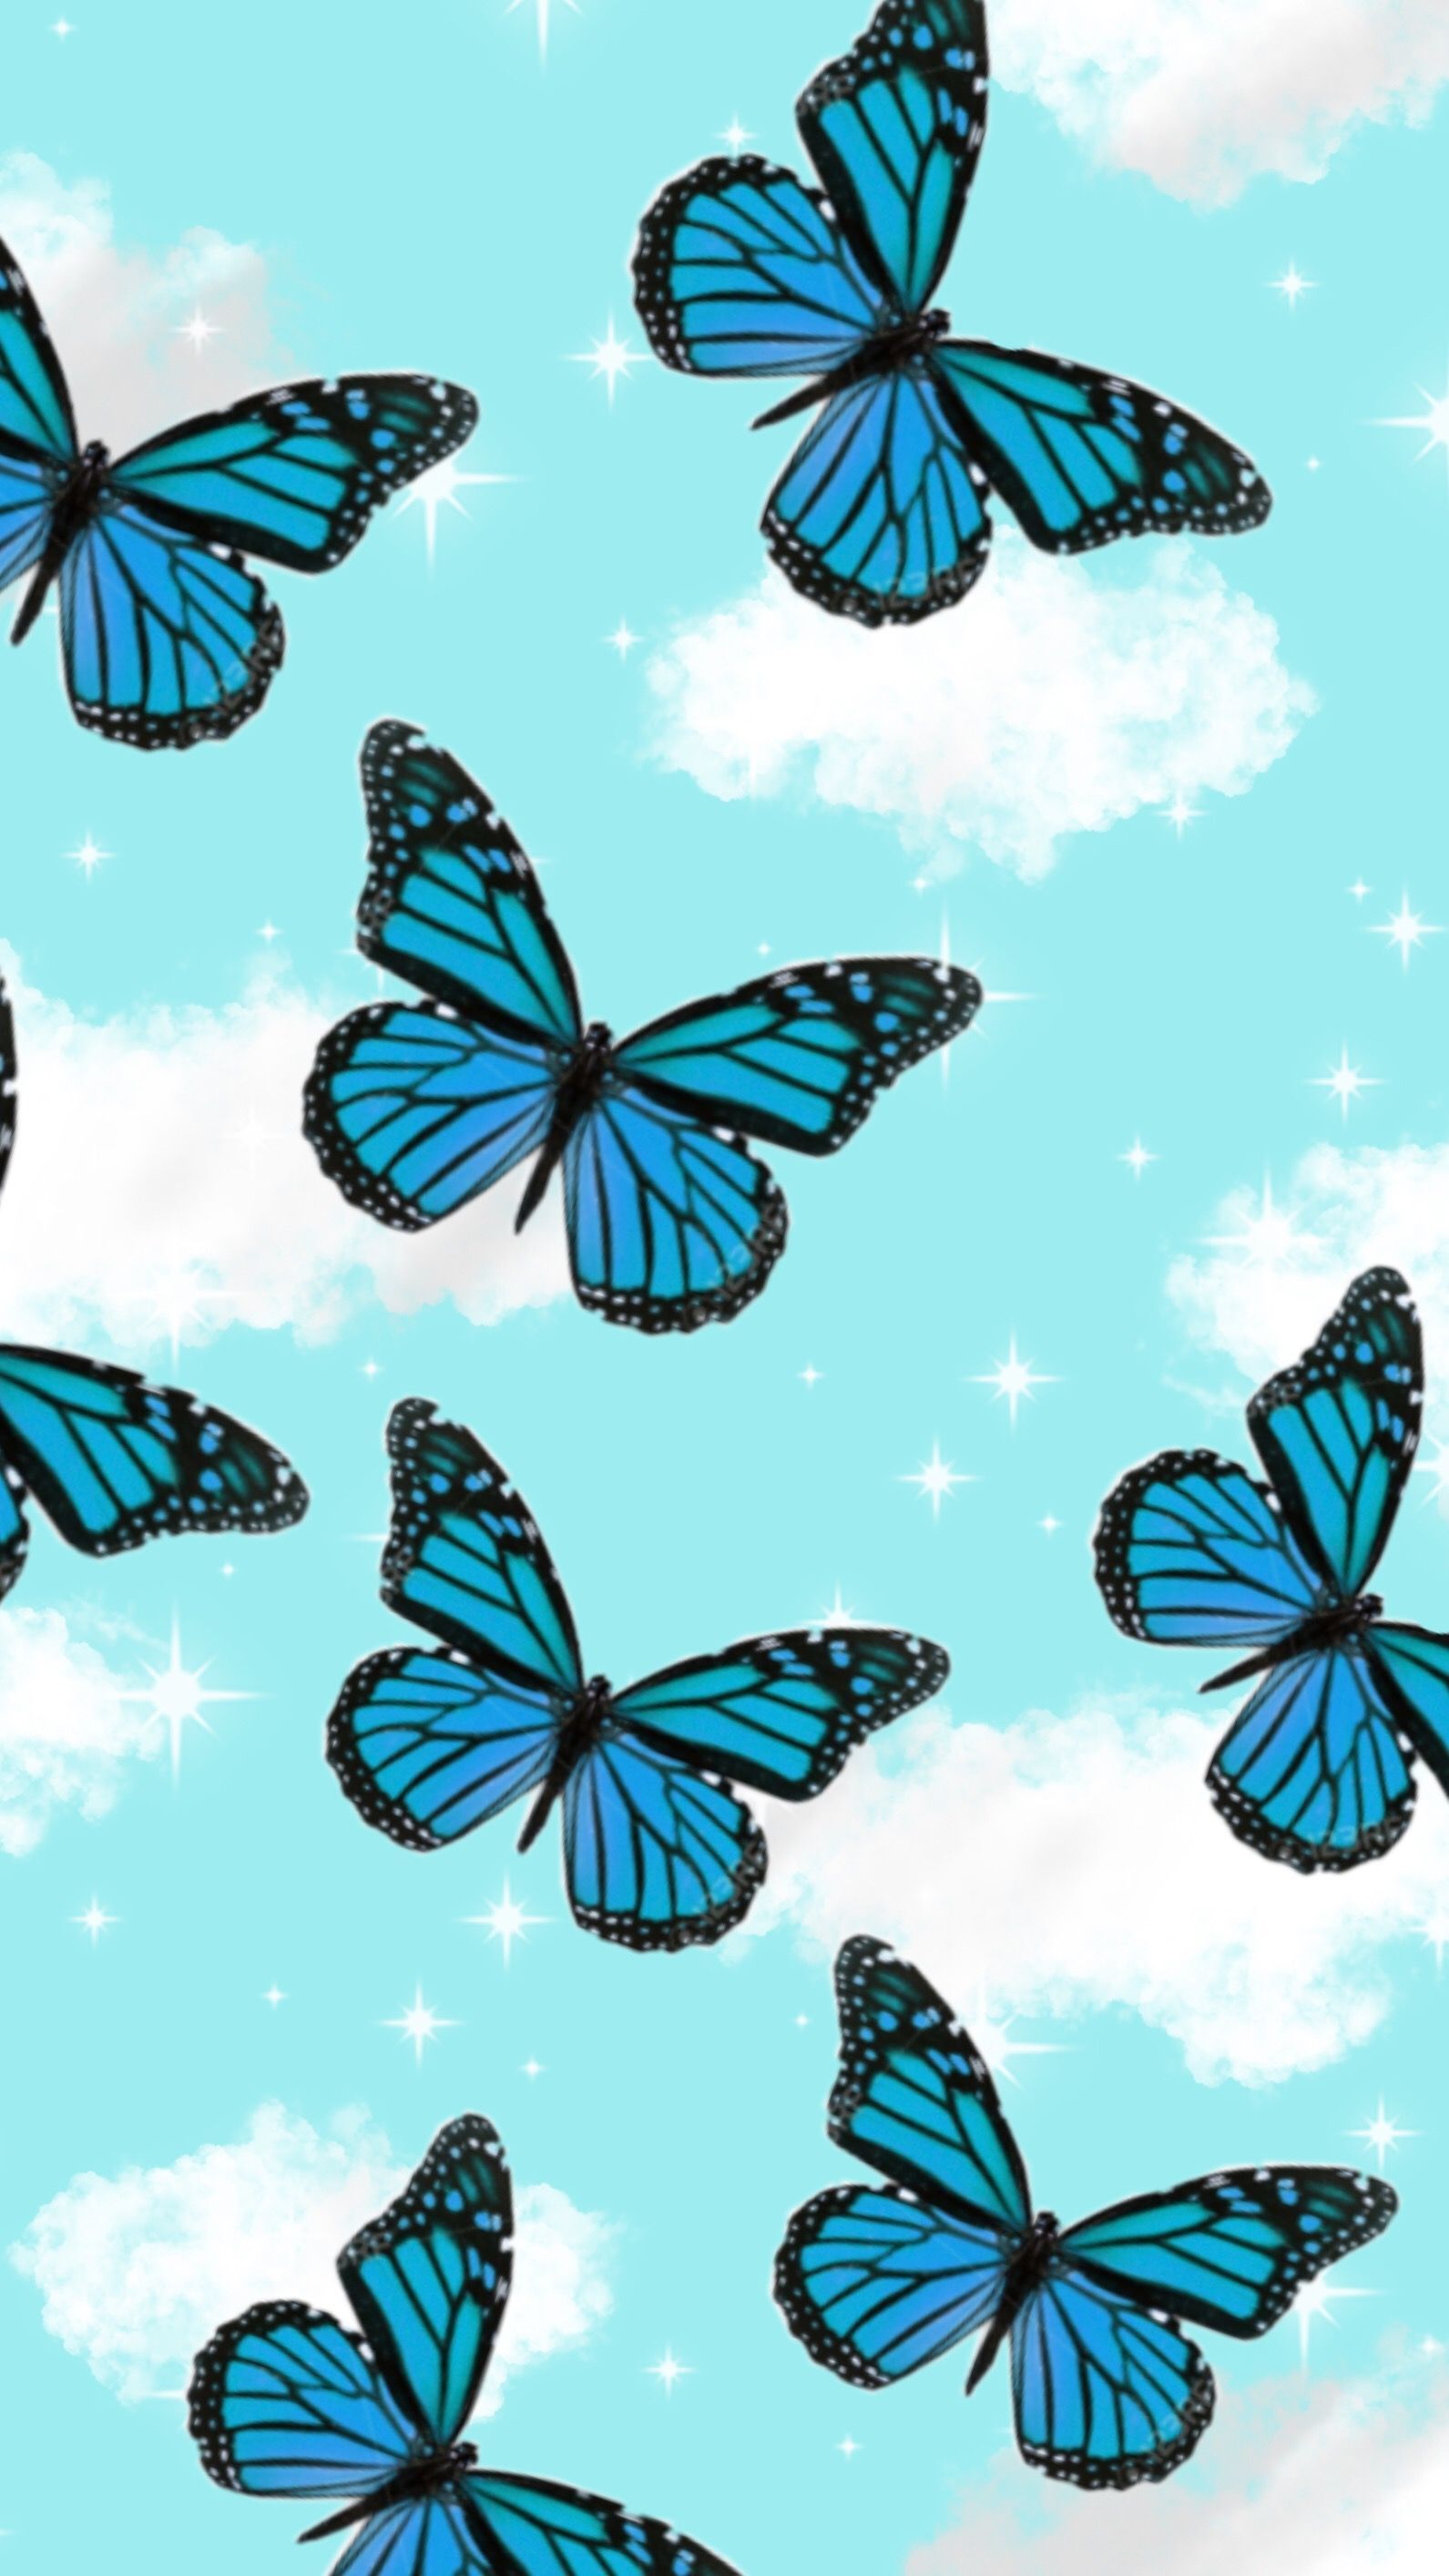 Aesthetic Blue Butterfly Wallpapers - Wallpaper Cave